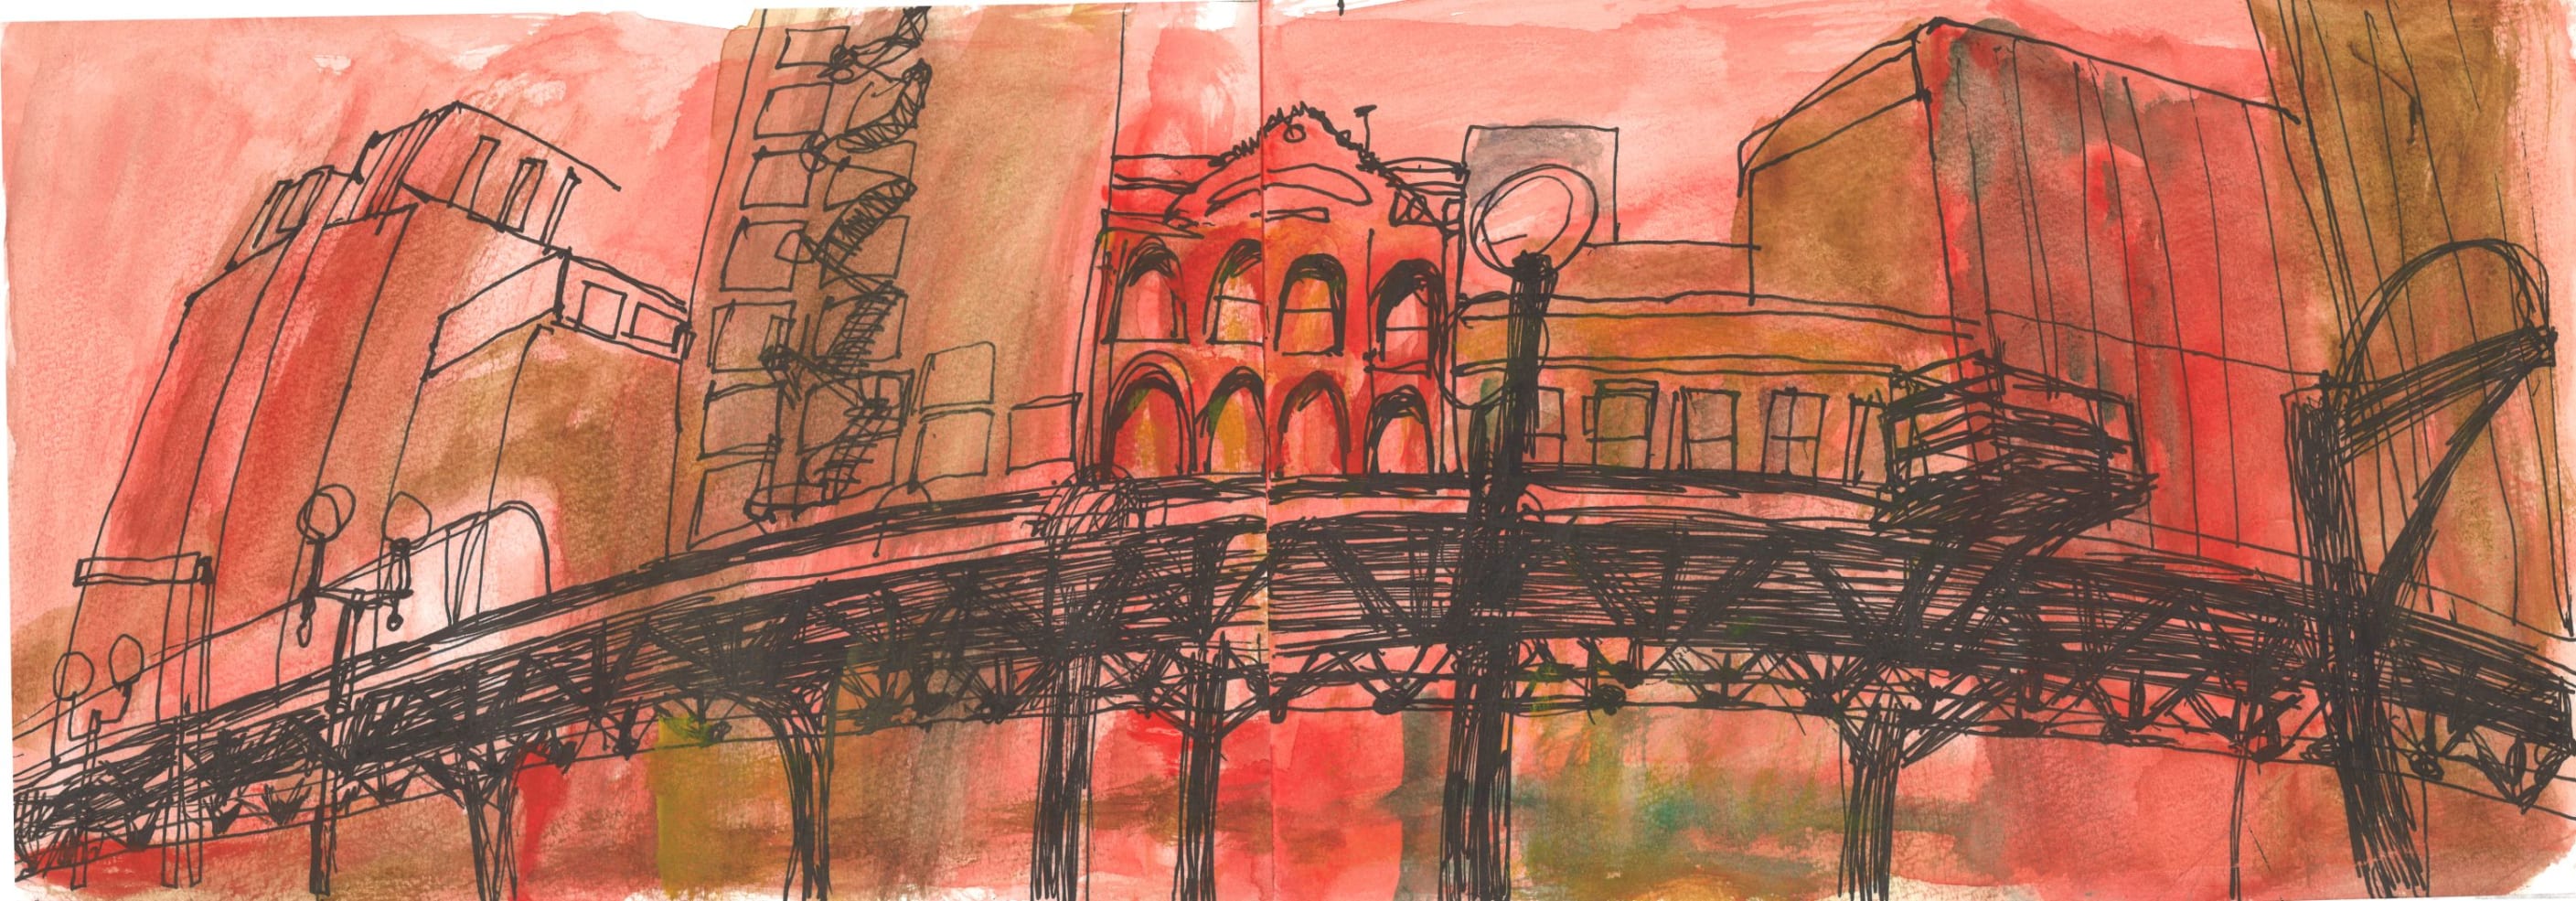 Sketch of a railway bridge and buildings in the background.